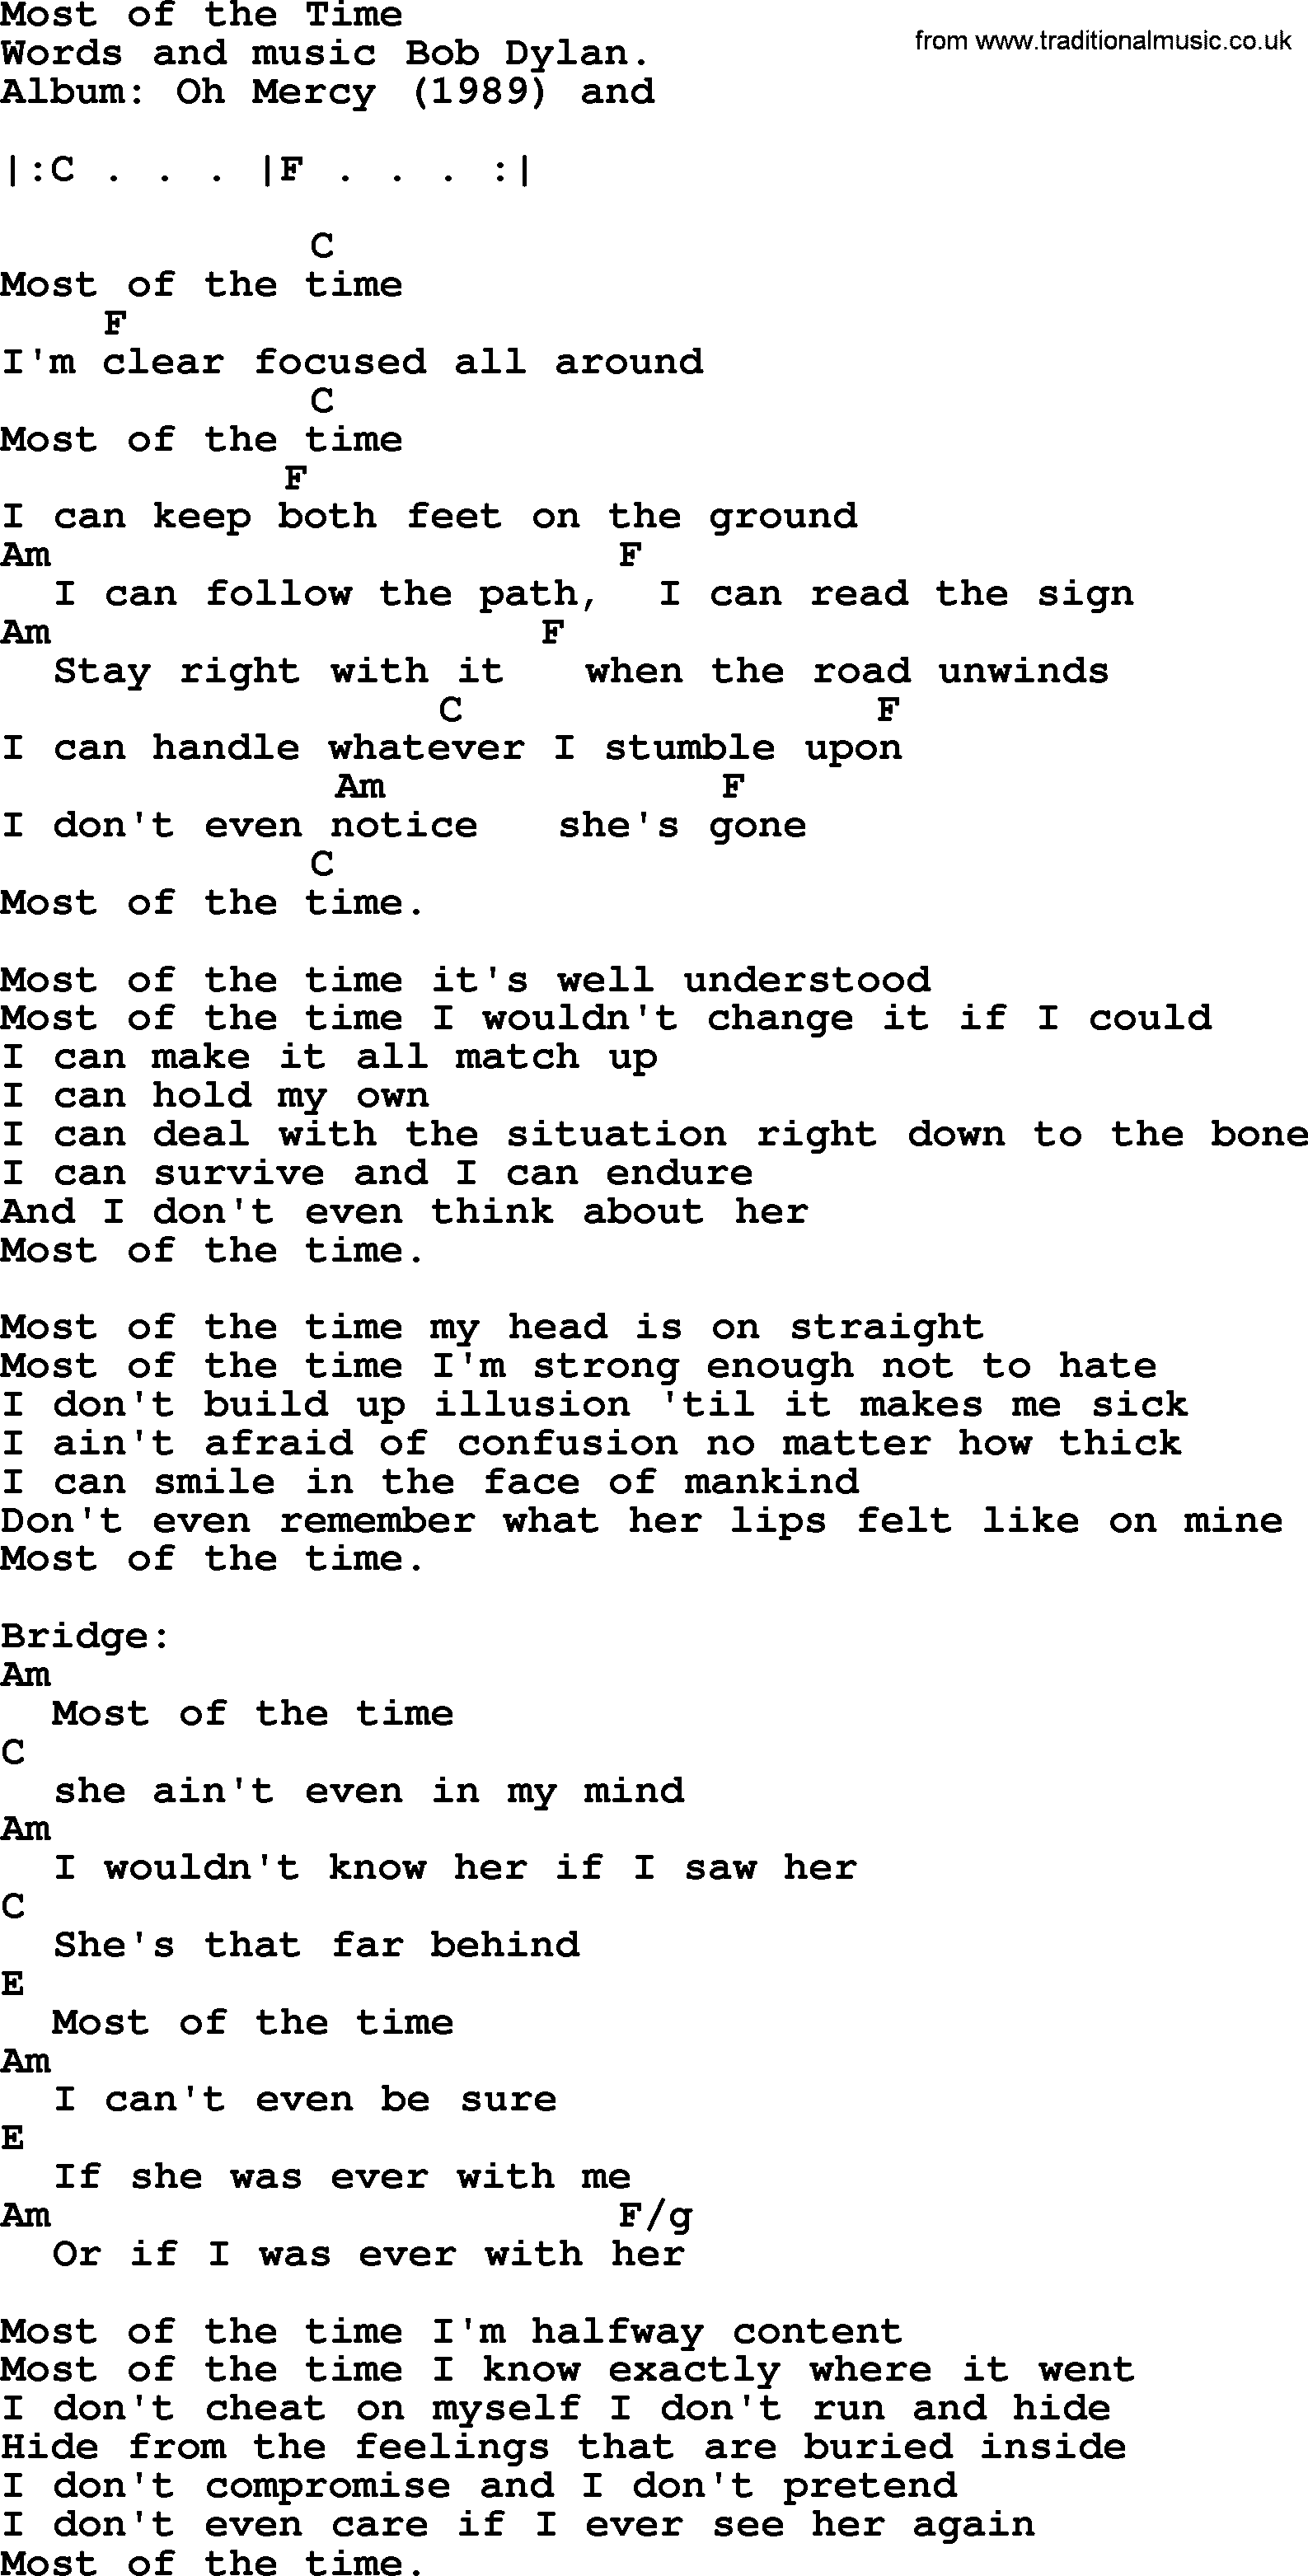 Bob Dylan song, lyrics with chords - Most of the Time